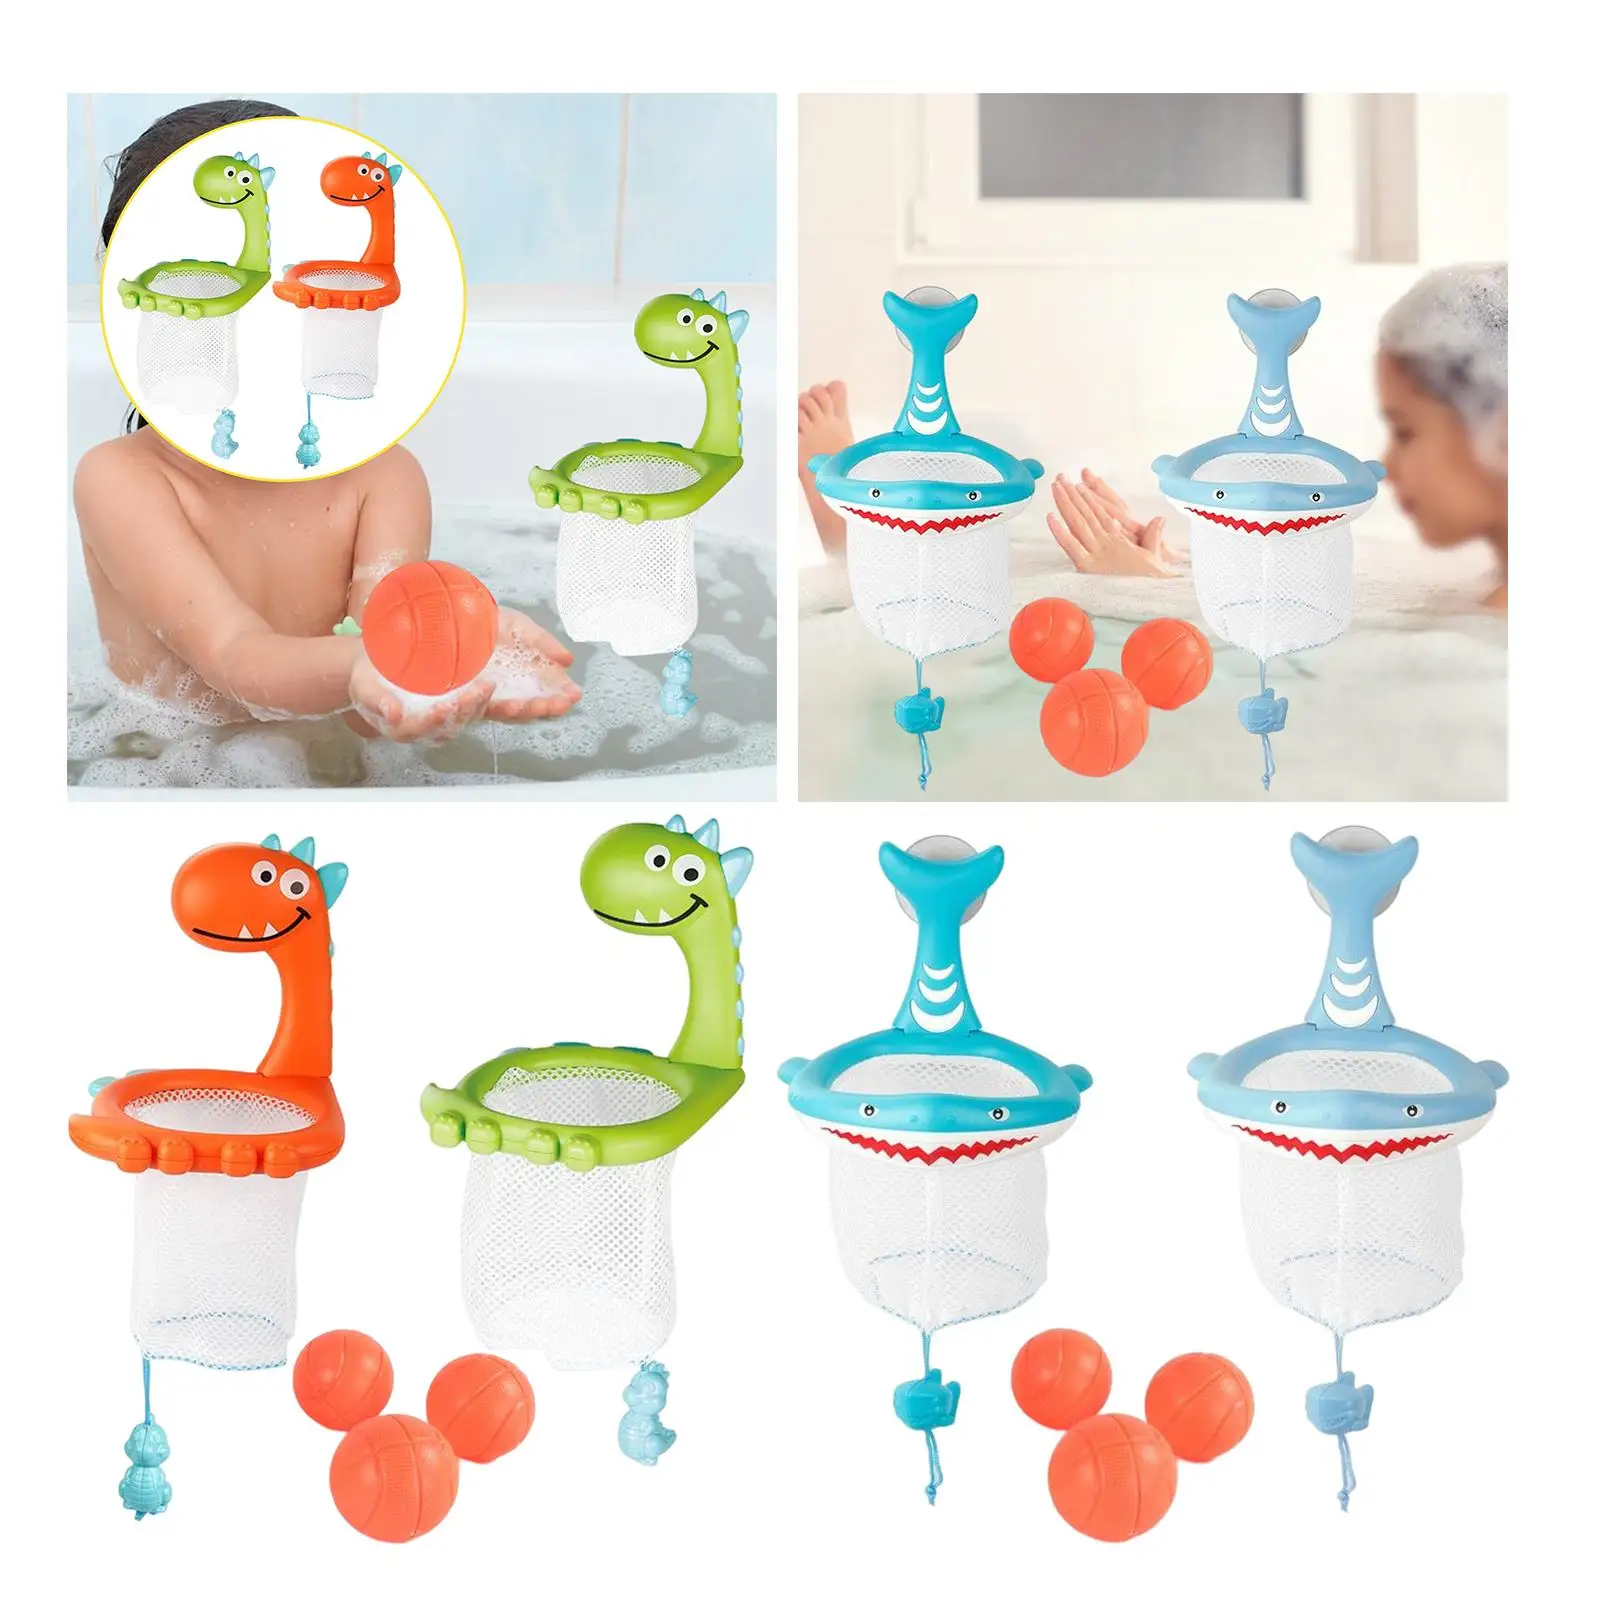 Bathtub Game Toy, Bathtub Basketball Hoop Throw Basket Toys Strong Suction Cup for Toddlers